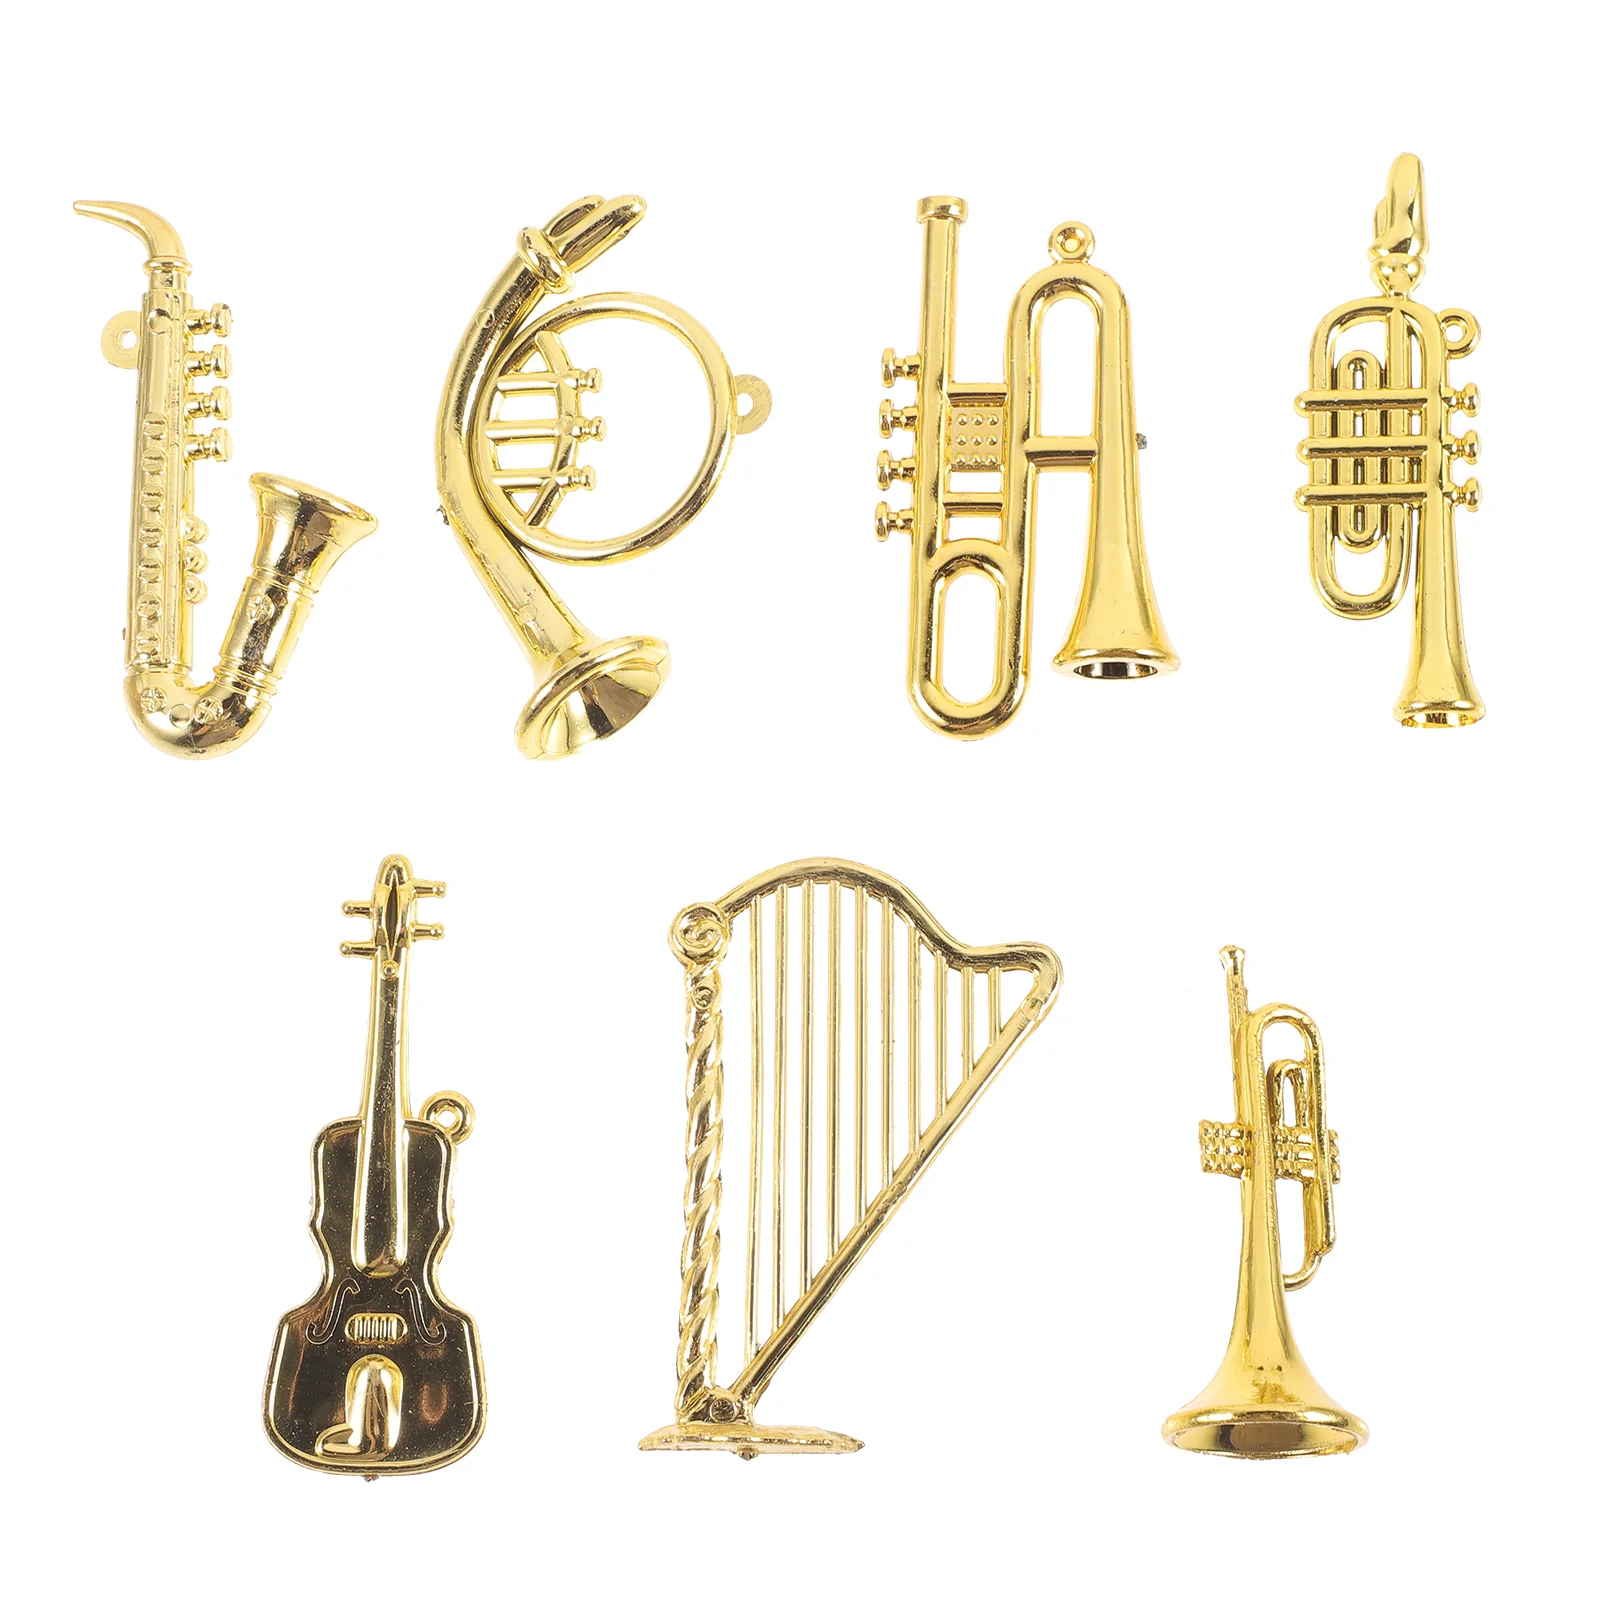 Miniature Instruments Model Festival Christmas Tree Musical Instrument Ornaments for Crafts DIY 105mm model tree armatures landscape model train railway railroad layout scenery diy model tree making miniature dioramas gaming